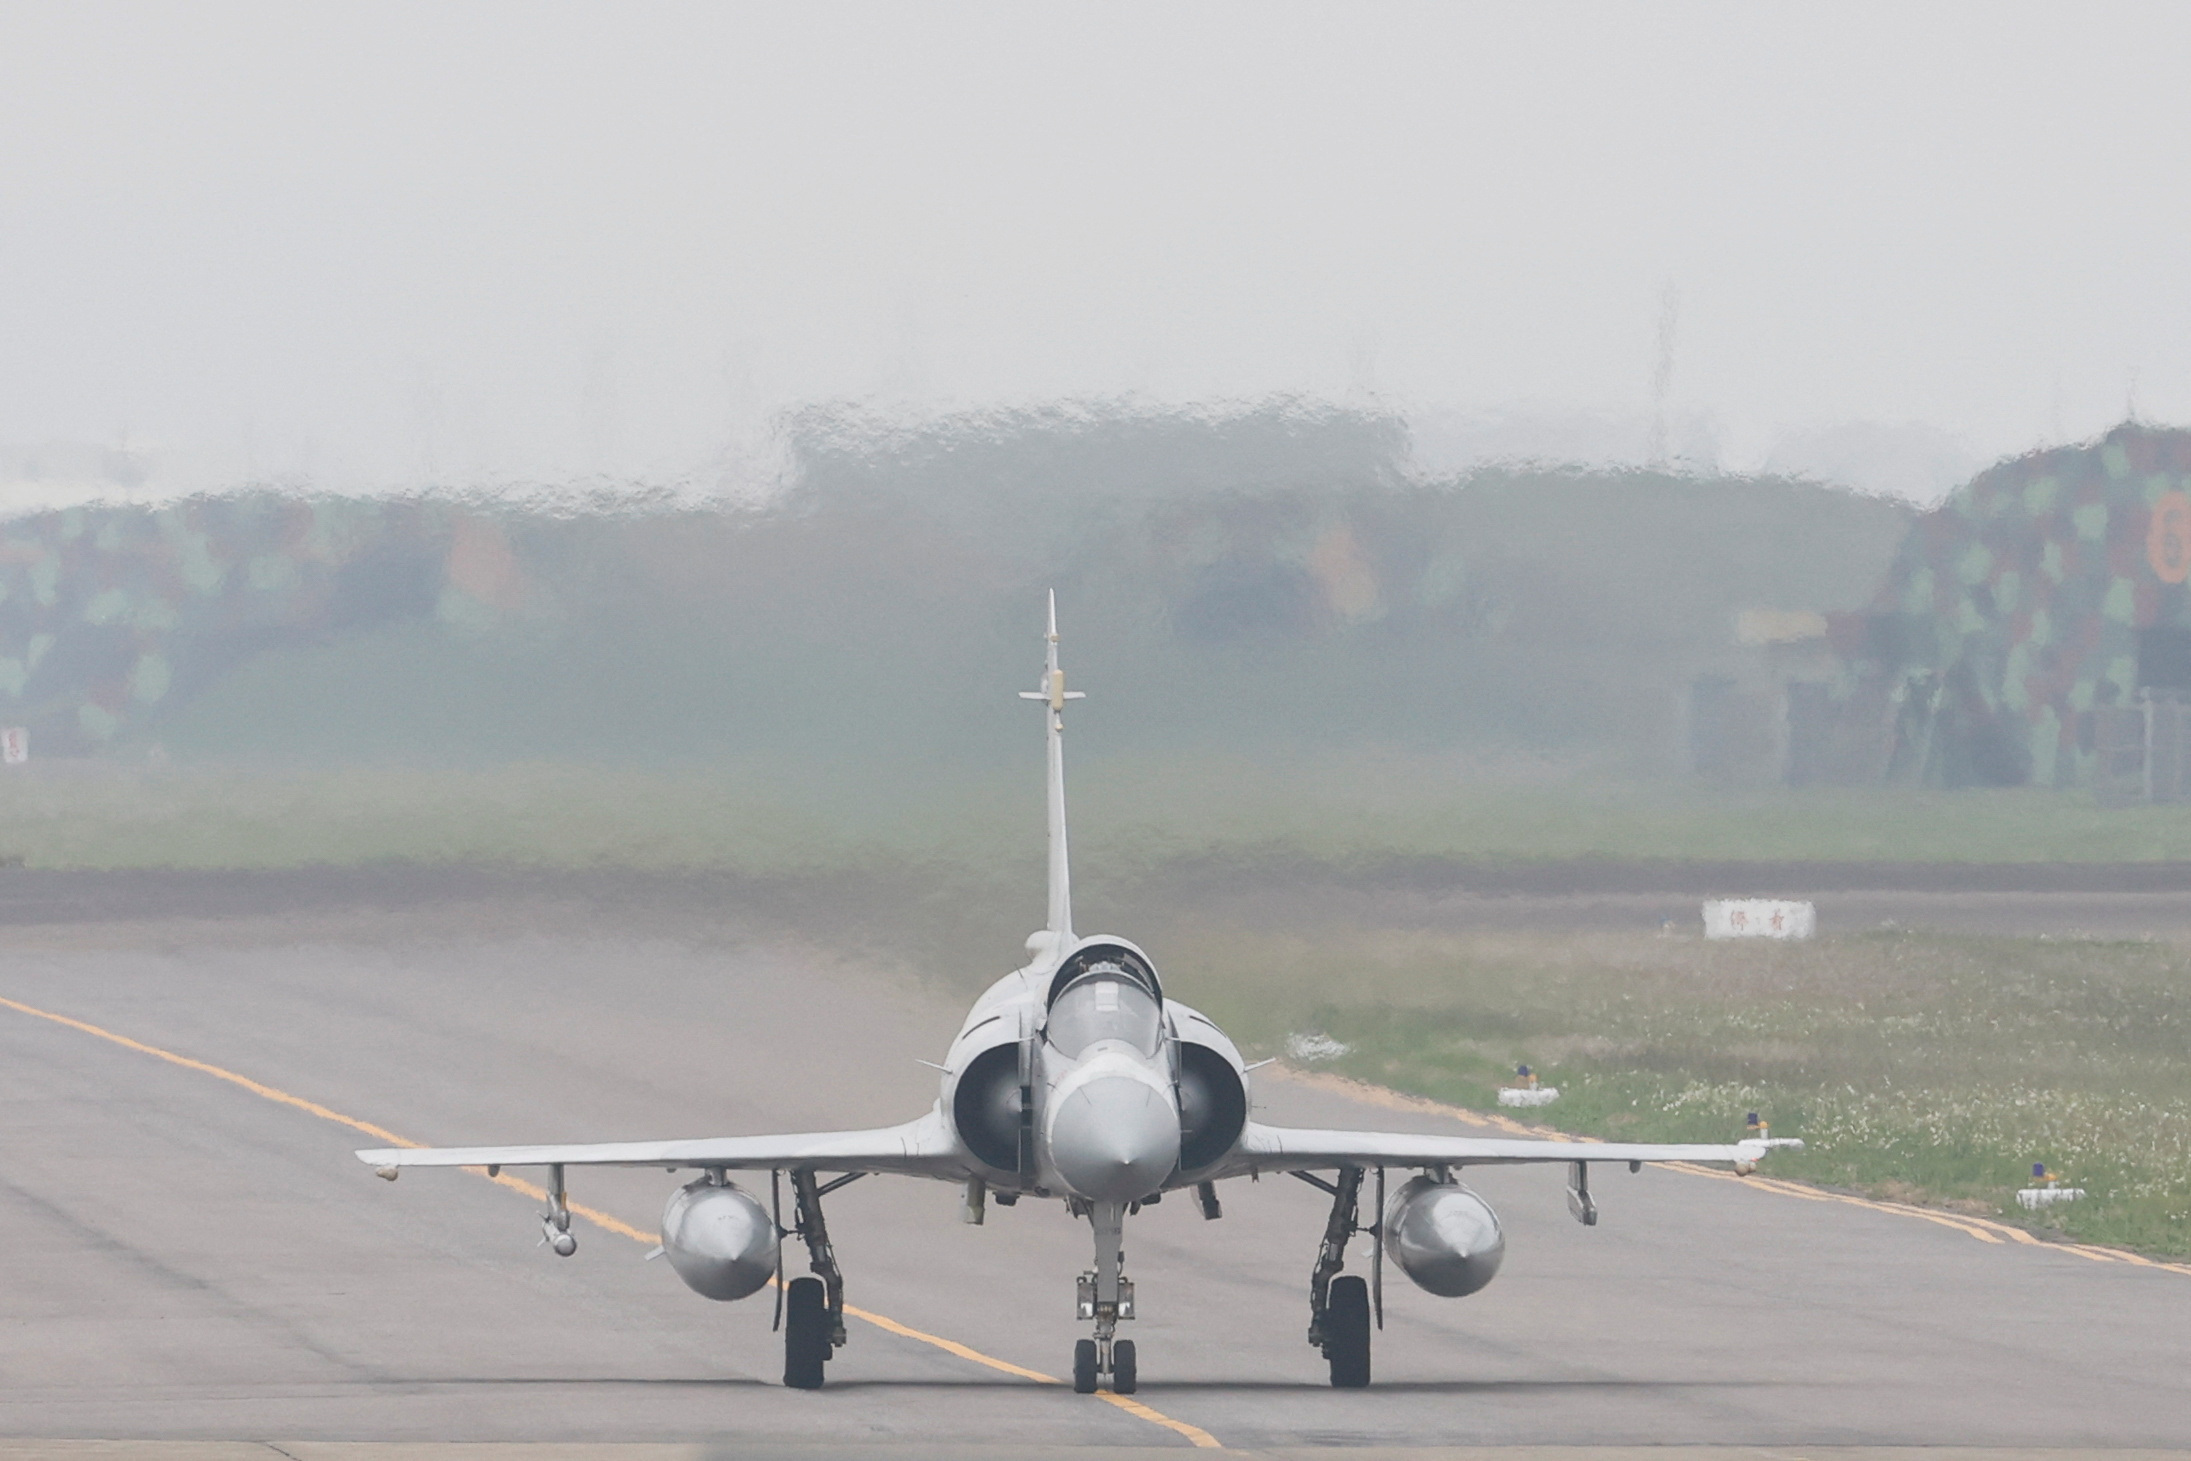 A Taiwan Air Force Mirage 2000 aircraft drives in the runway before taking off at Hsinchu Air Base in Hsinchu